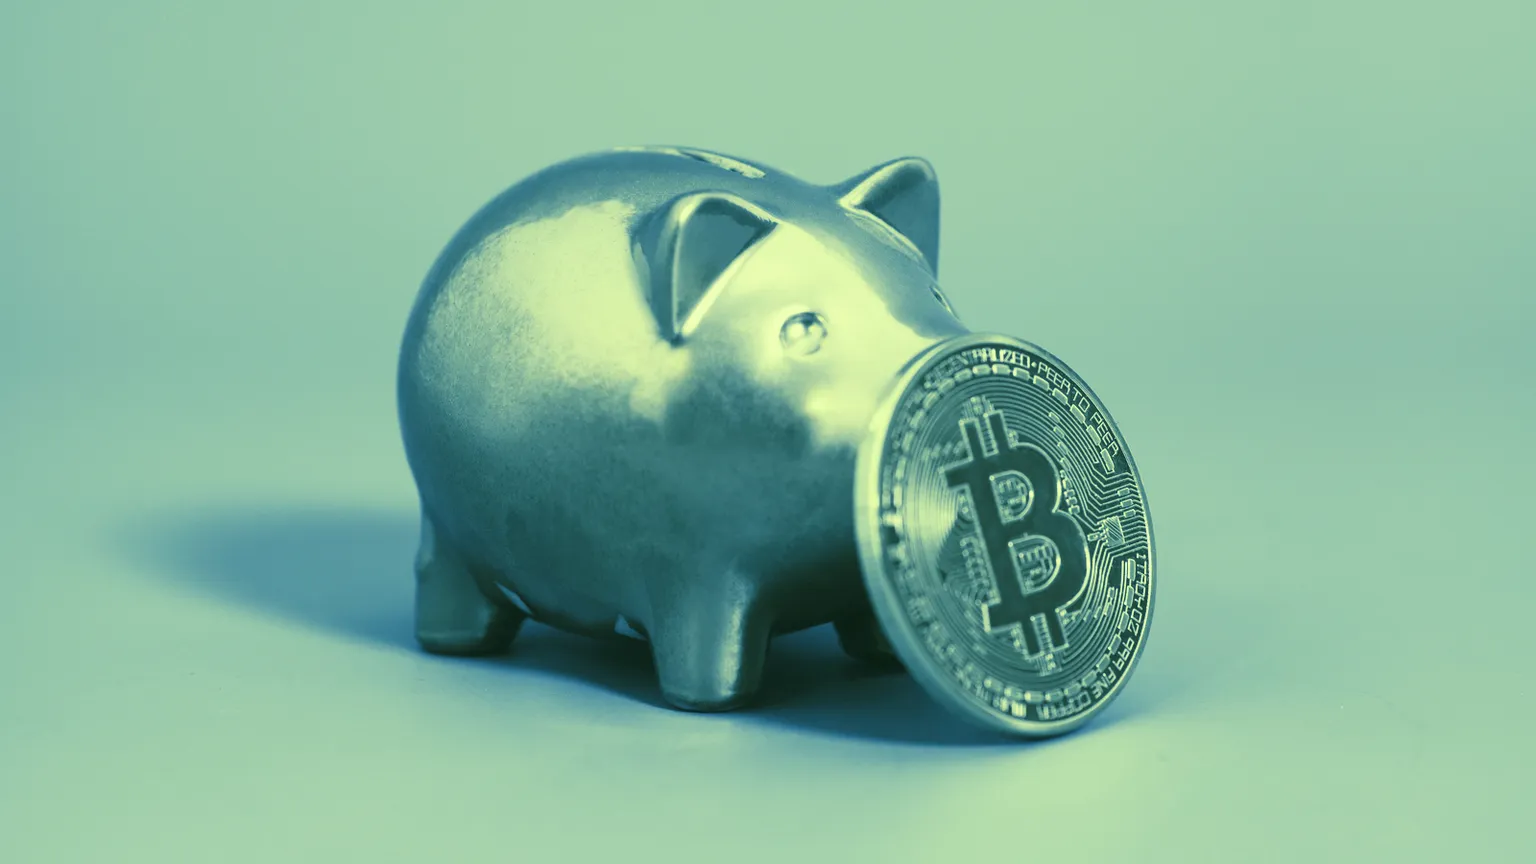 Bitcoin investments are becoming more popular. Image: Shutterstock